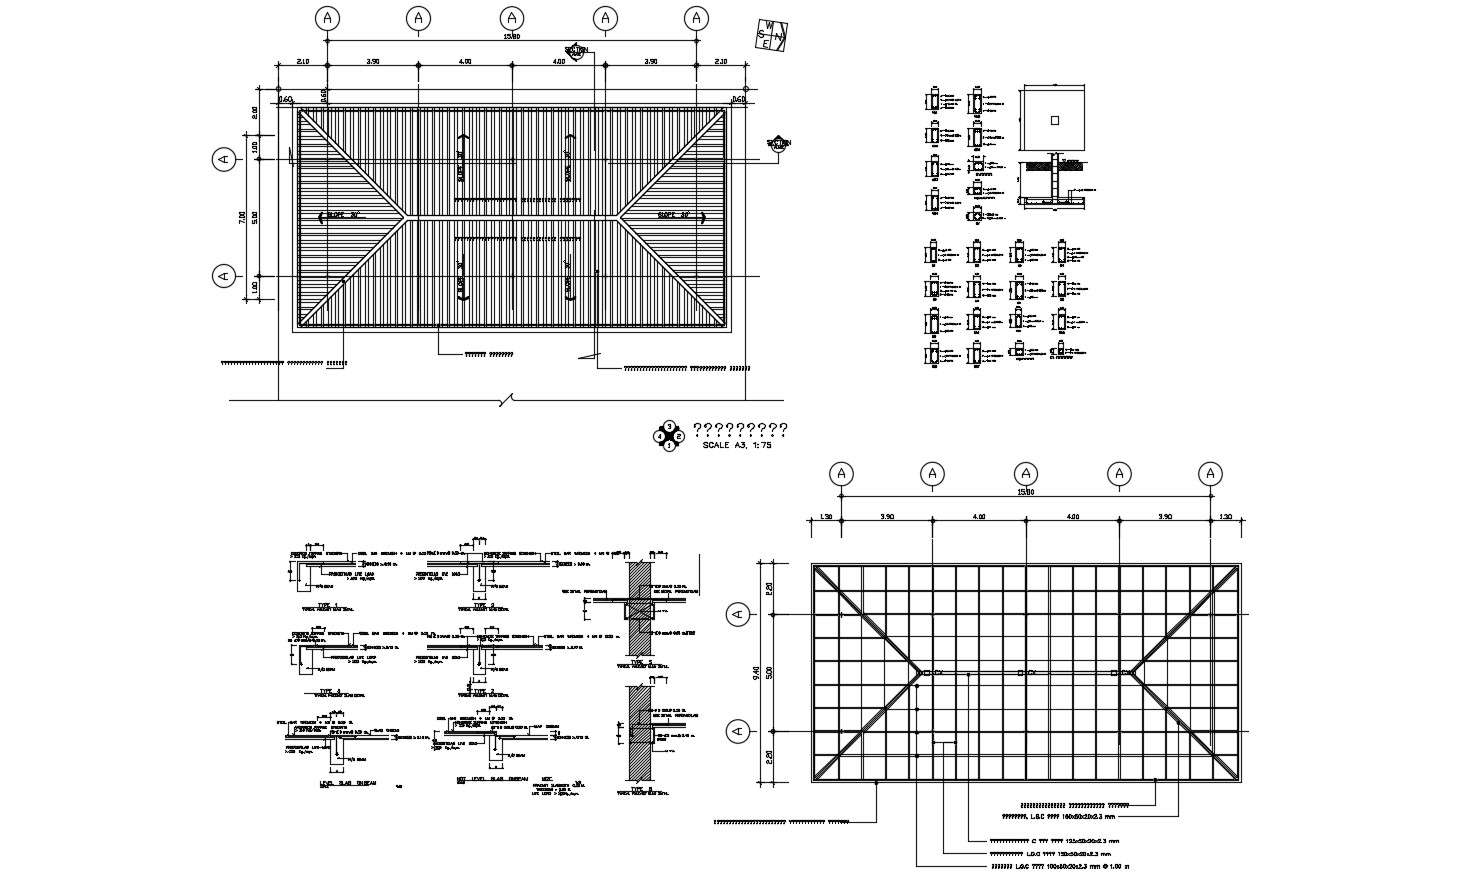 Floor Plan Of The House With Roof Plan In Dwg File Cadbull My Xxx Hot Girl